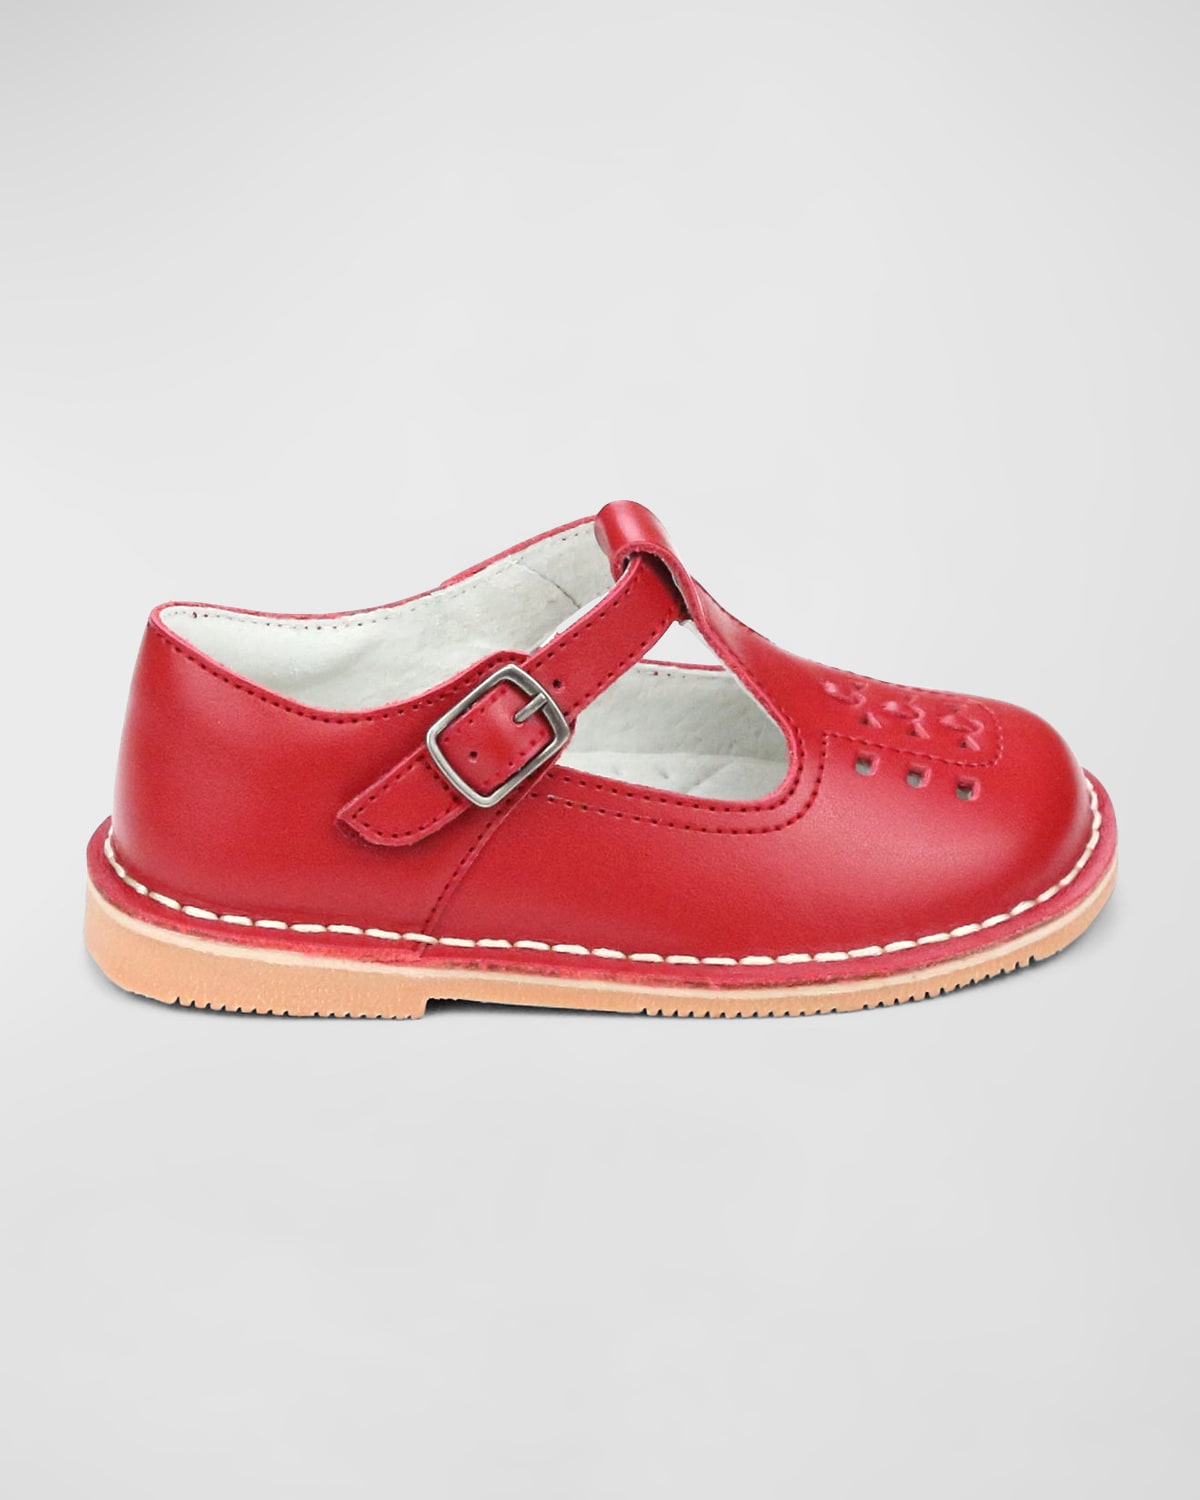 L'amour Shoes Girl's Kaia Leather Mary Jane Shoes, Baby/toddler/kids In Red